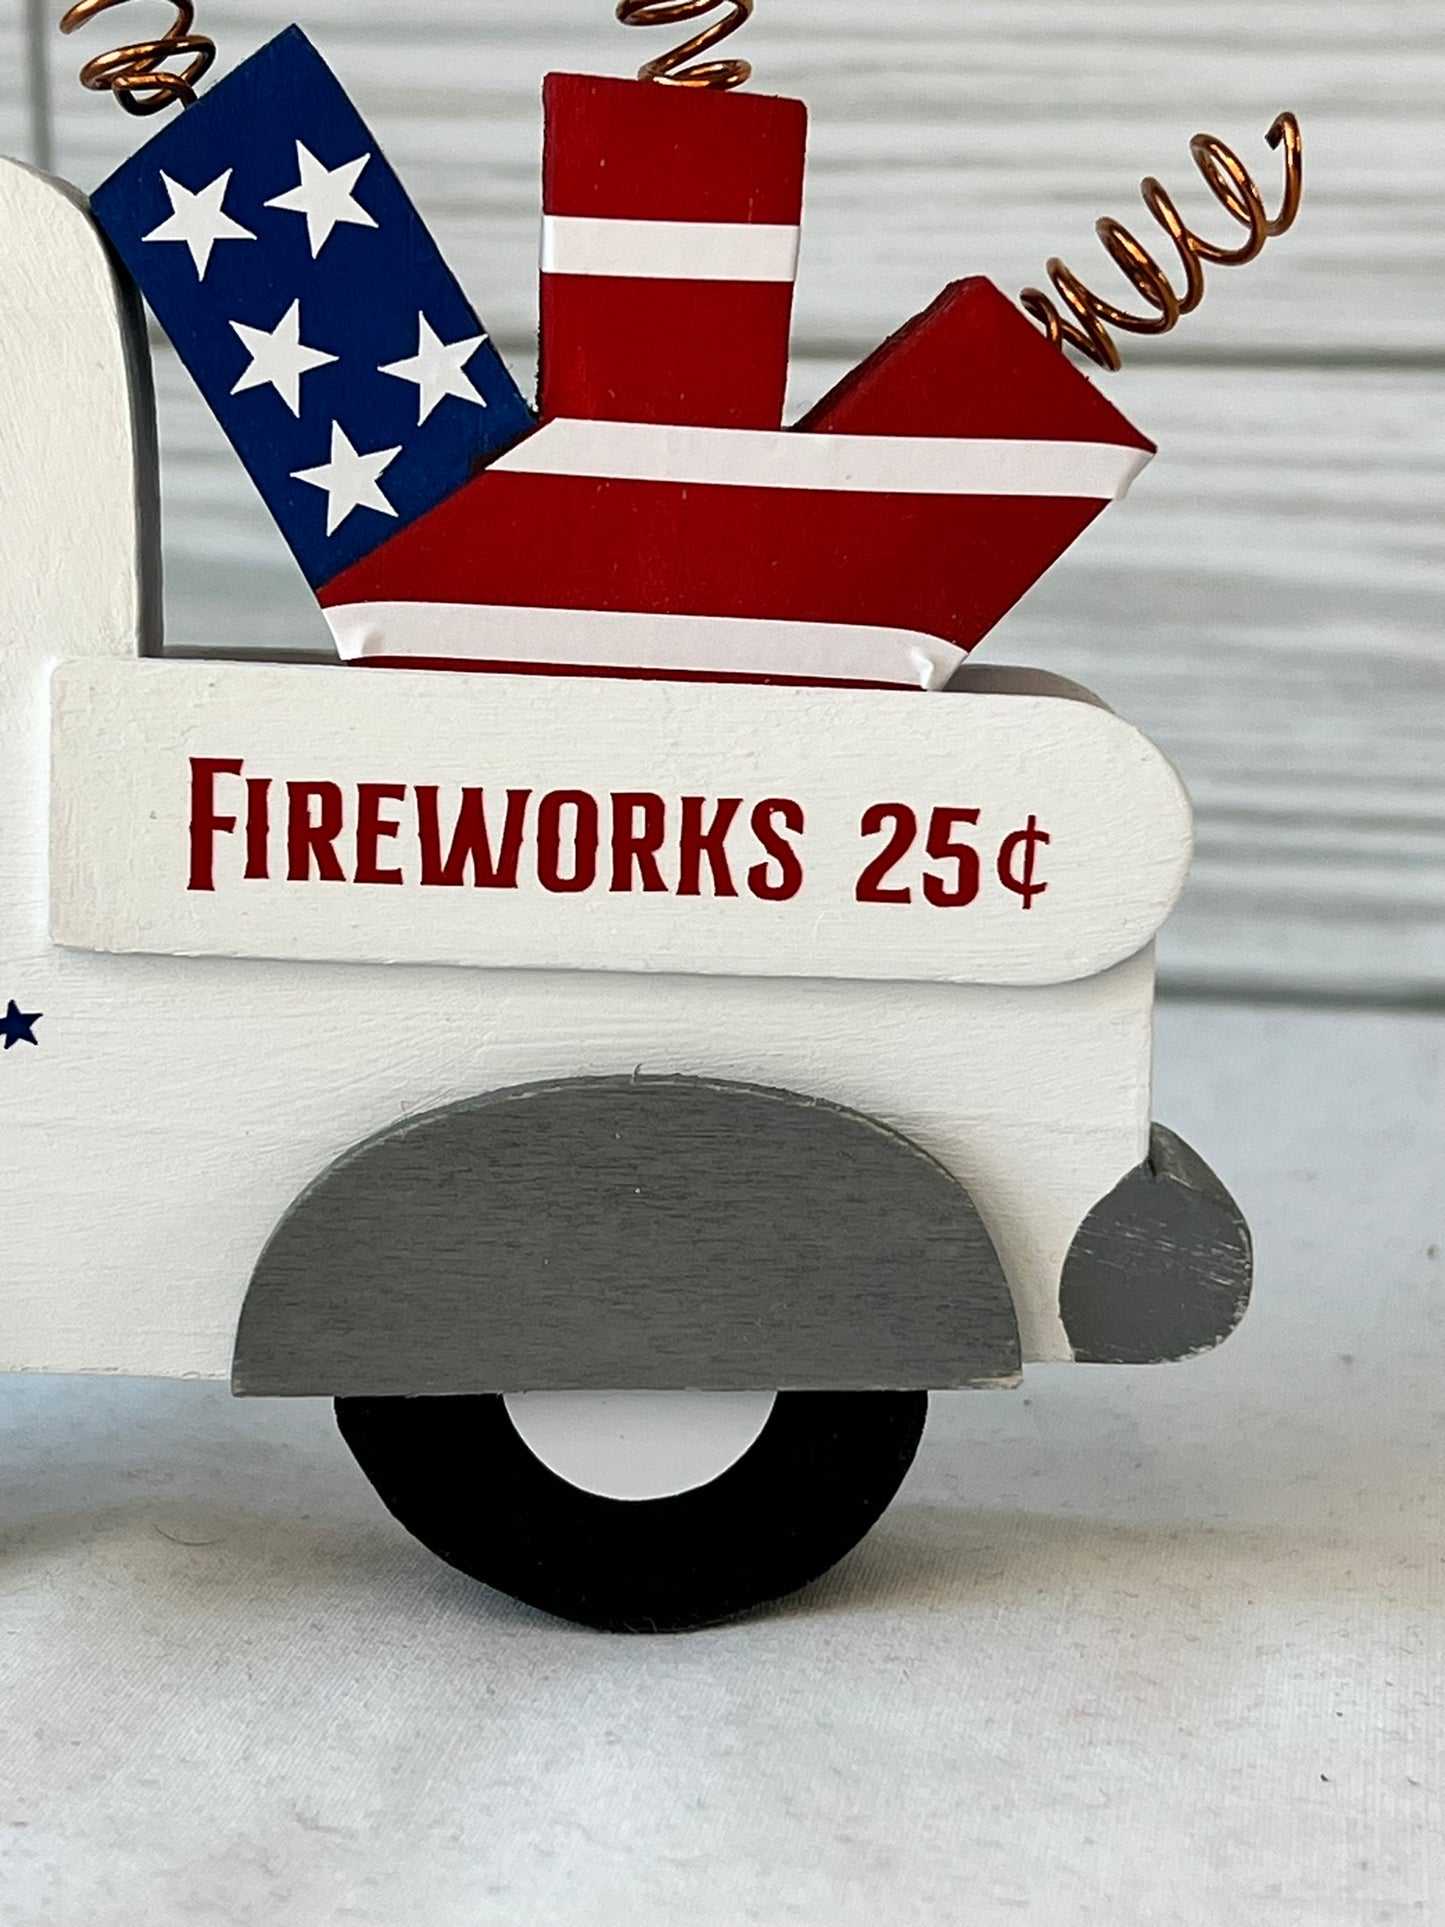 July 4th Fireworks Tiered Tray Truck